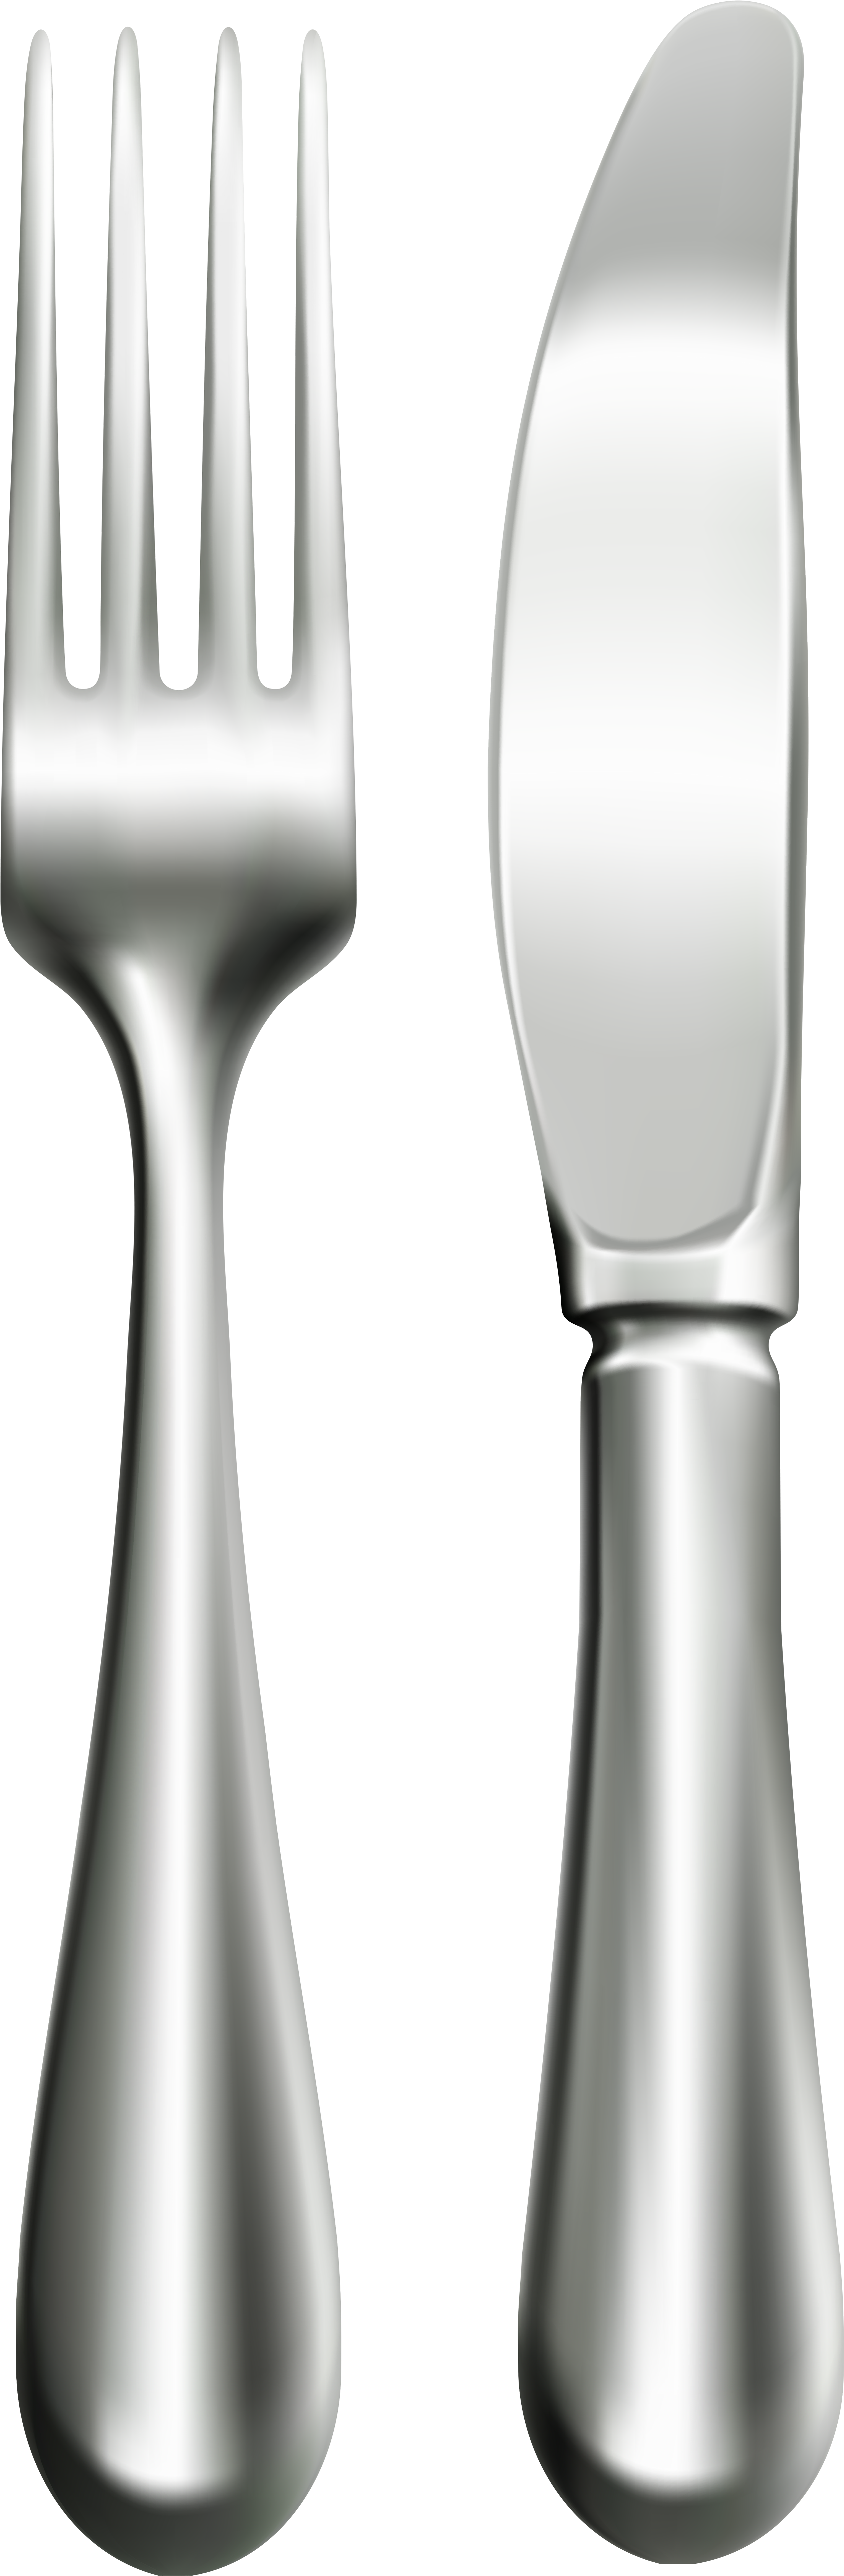 Free Fork And Knife Clipart Black And White, Download Free Clip Art.